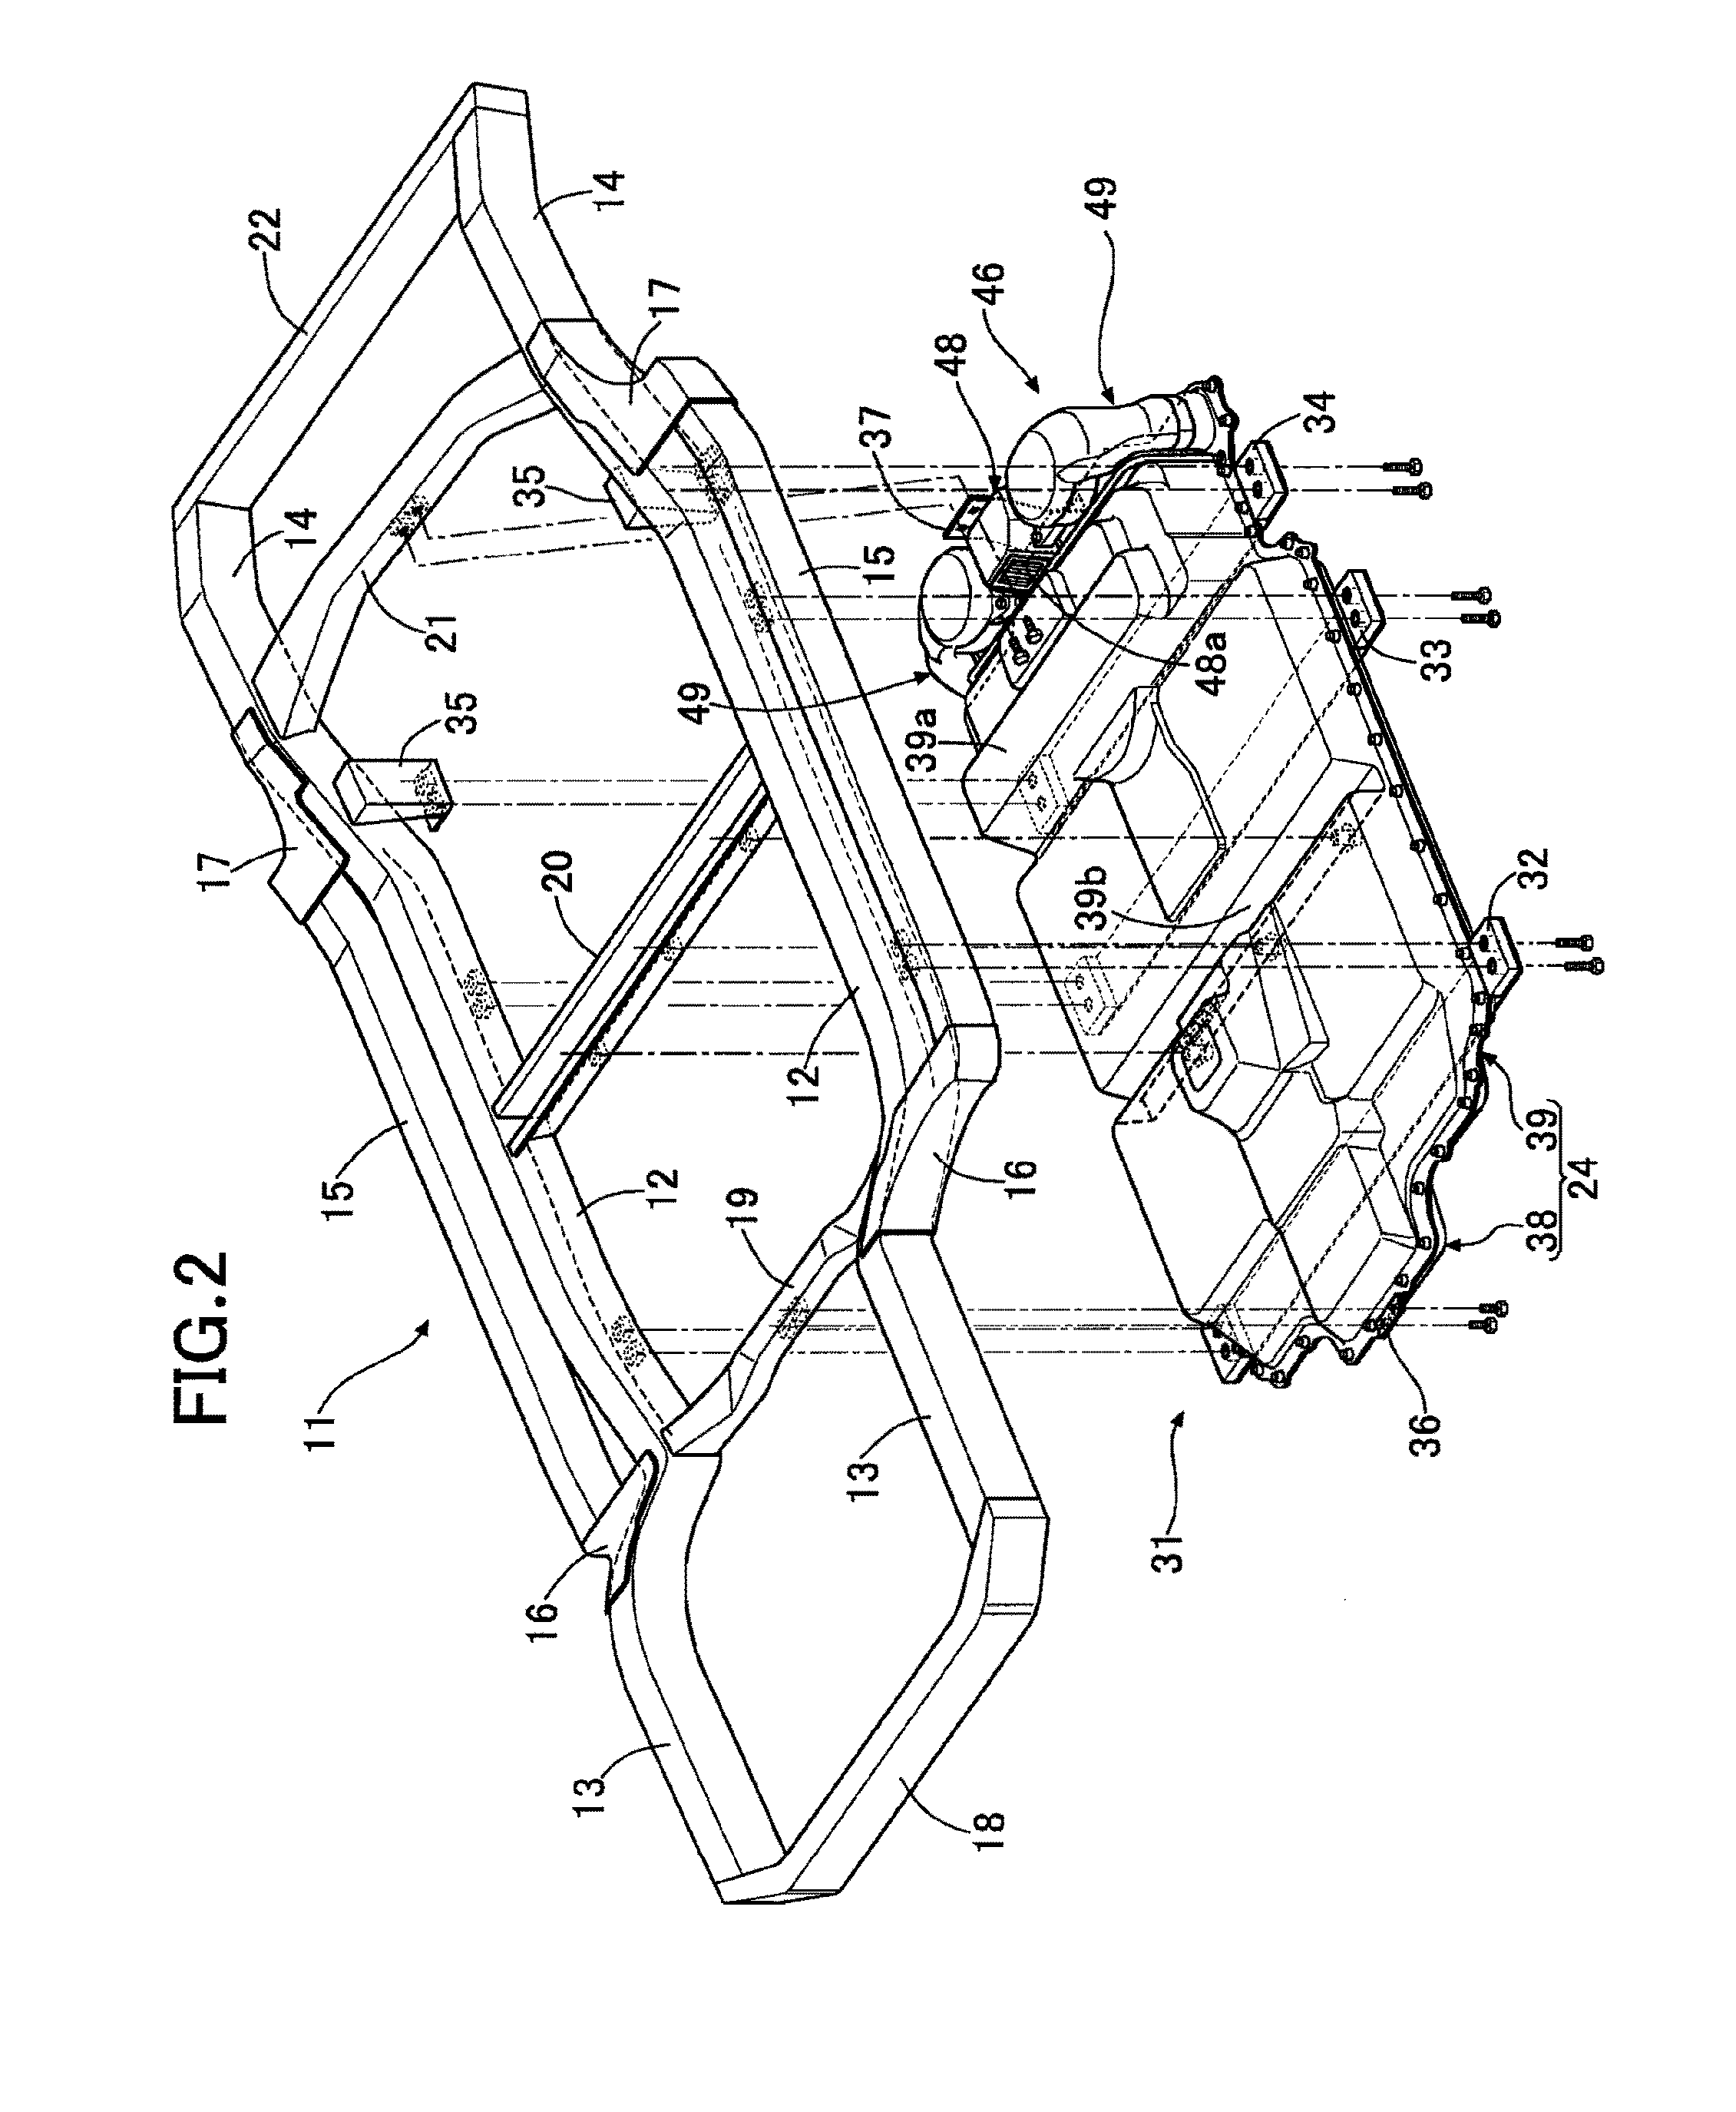 Structure for mounting battery pack on vehicle